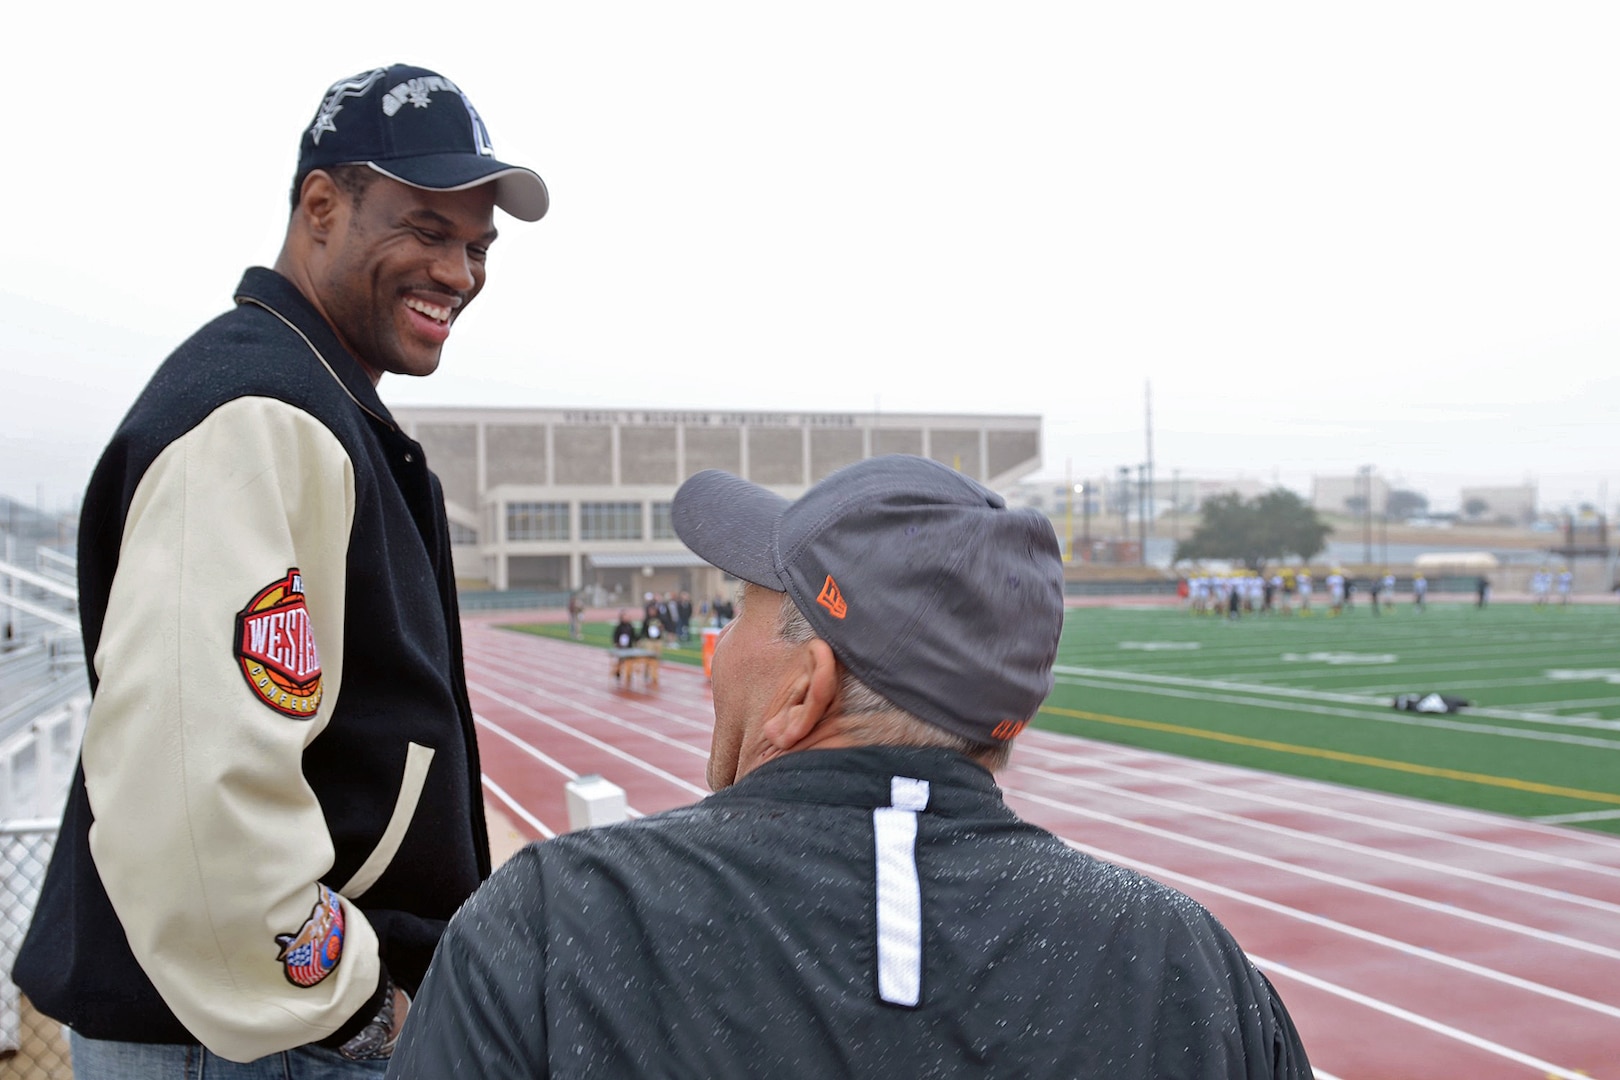 Former San Antonio Spurs center David Robinson speaks with a U.S. Army All-American West Team family member at the Blossom Athletic Center in San Antonio, Dec. 31, 2012.